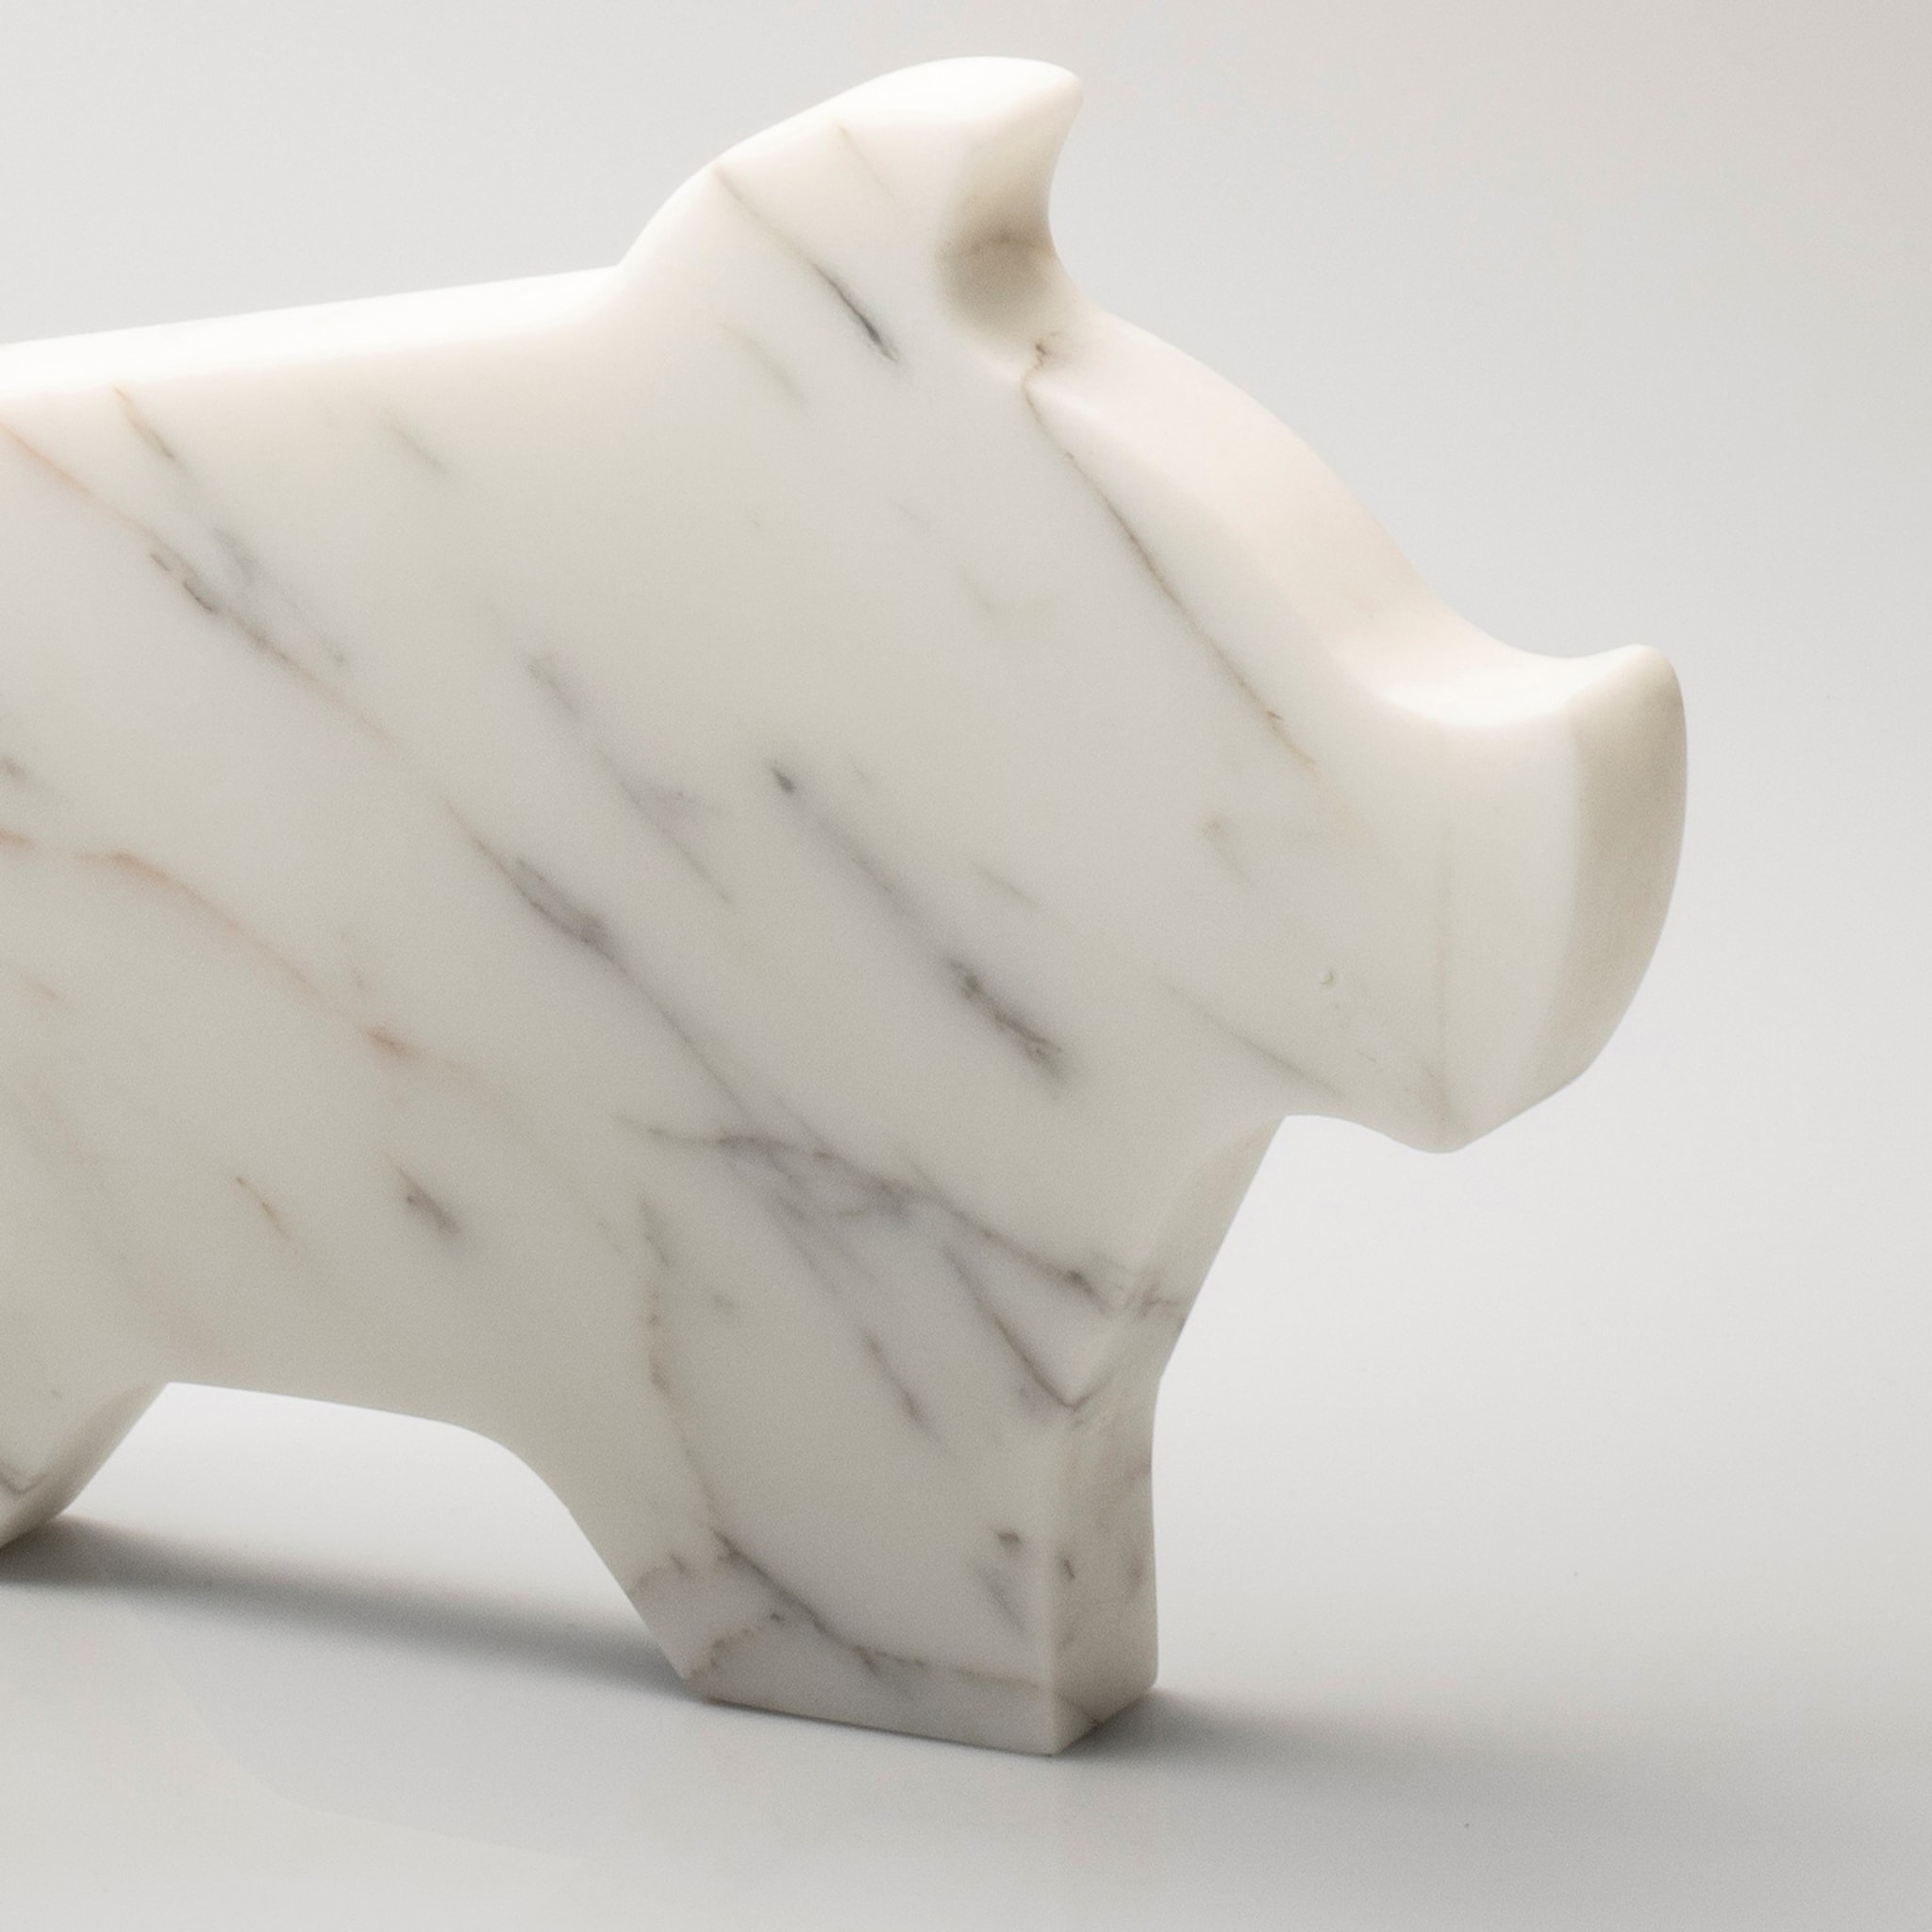 Pig Large White Statuette by Alessandra Grasso - Alternative view 1